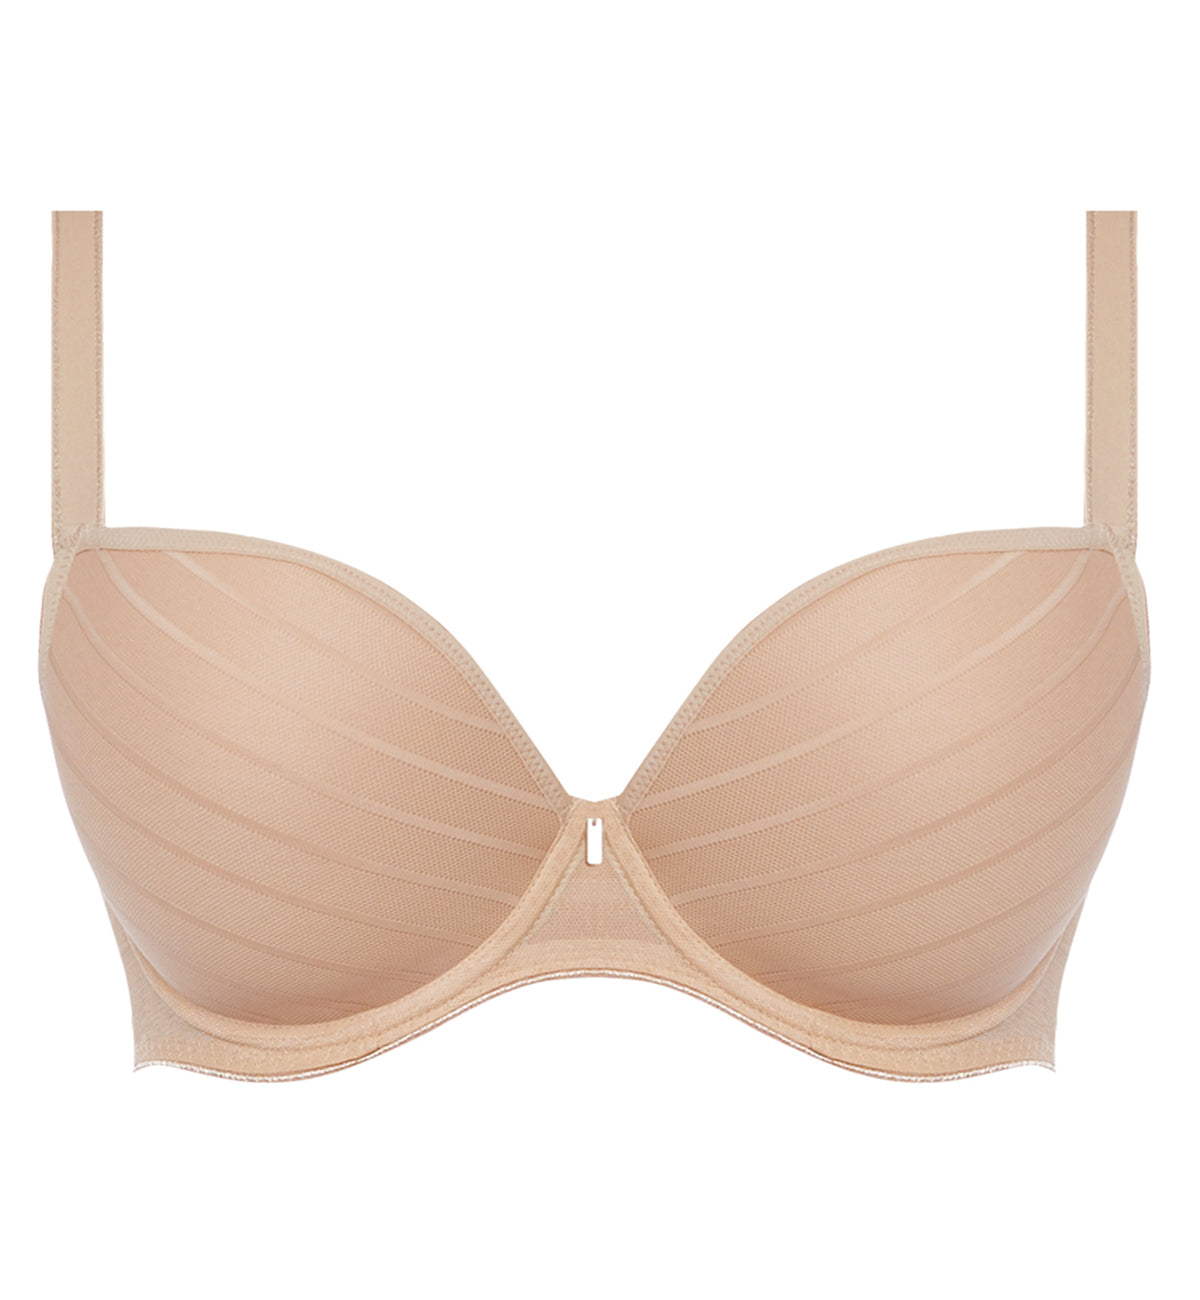 Freya Cameo Deco Plunge Moulded Underwire Bra (3160),28D,Sand - Sand,28D